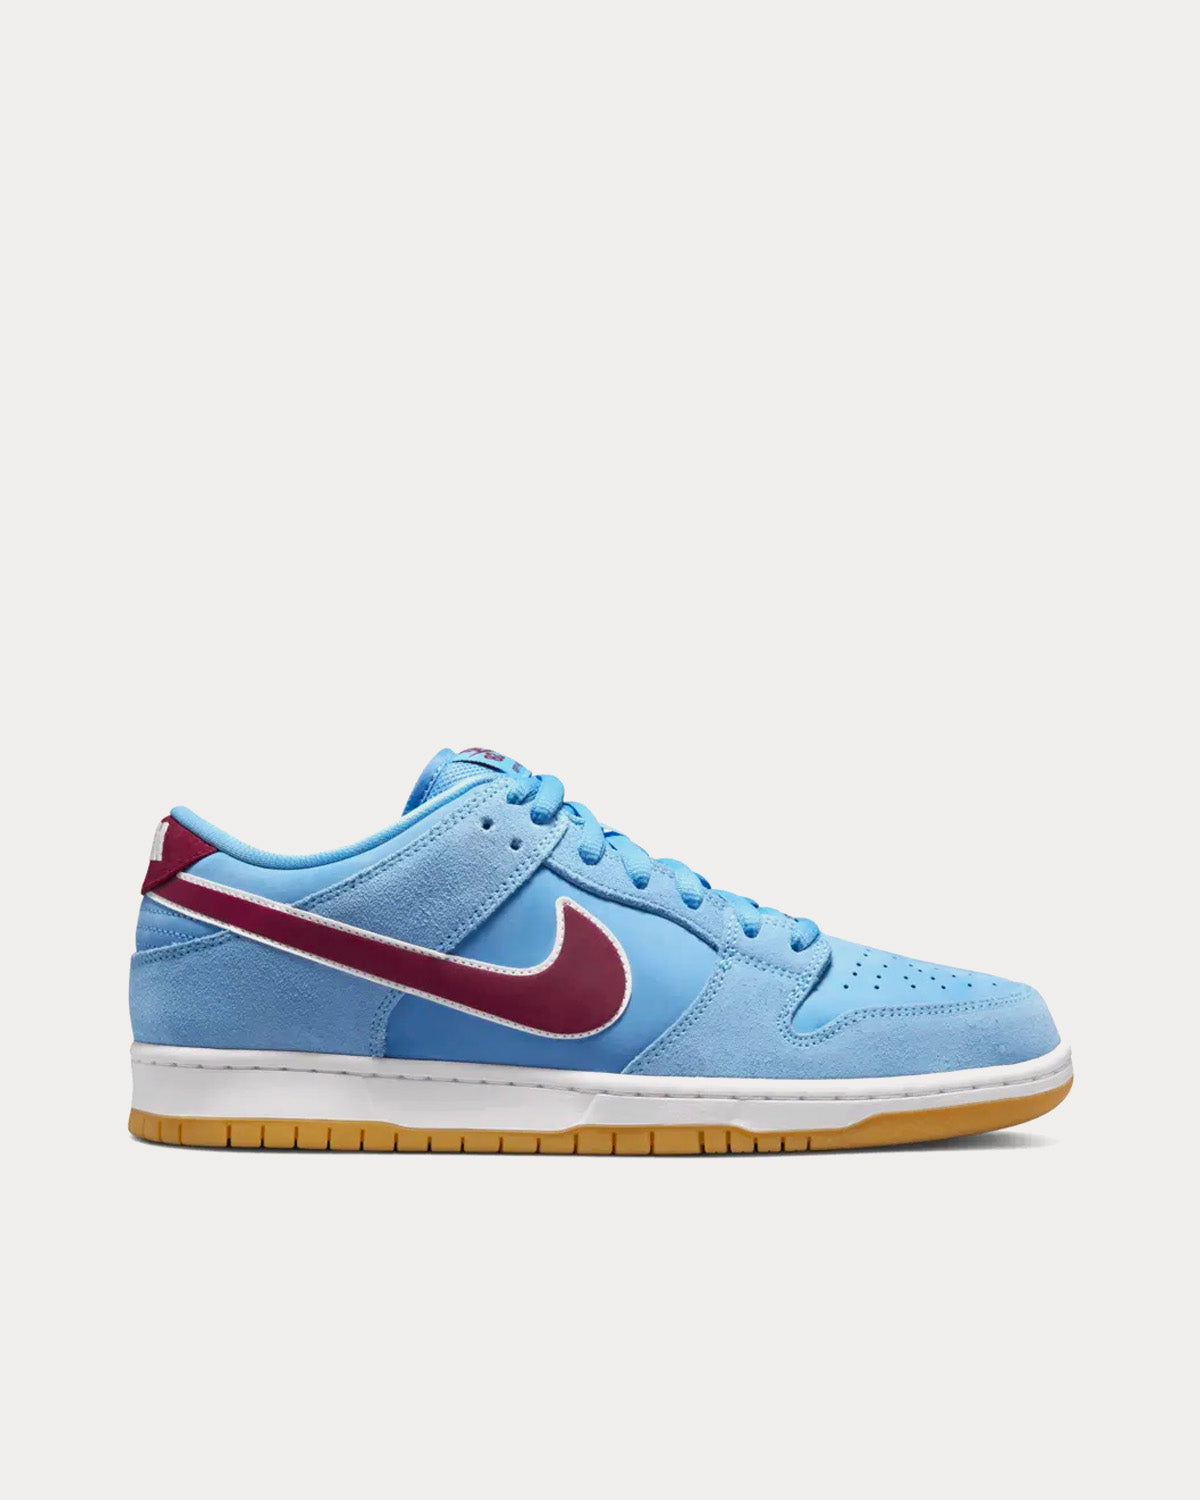 SB Dunk Low 'Valour Blue and Team Maroon' Low Top Sneakers